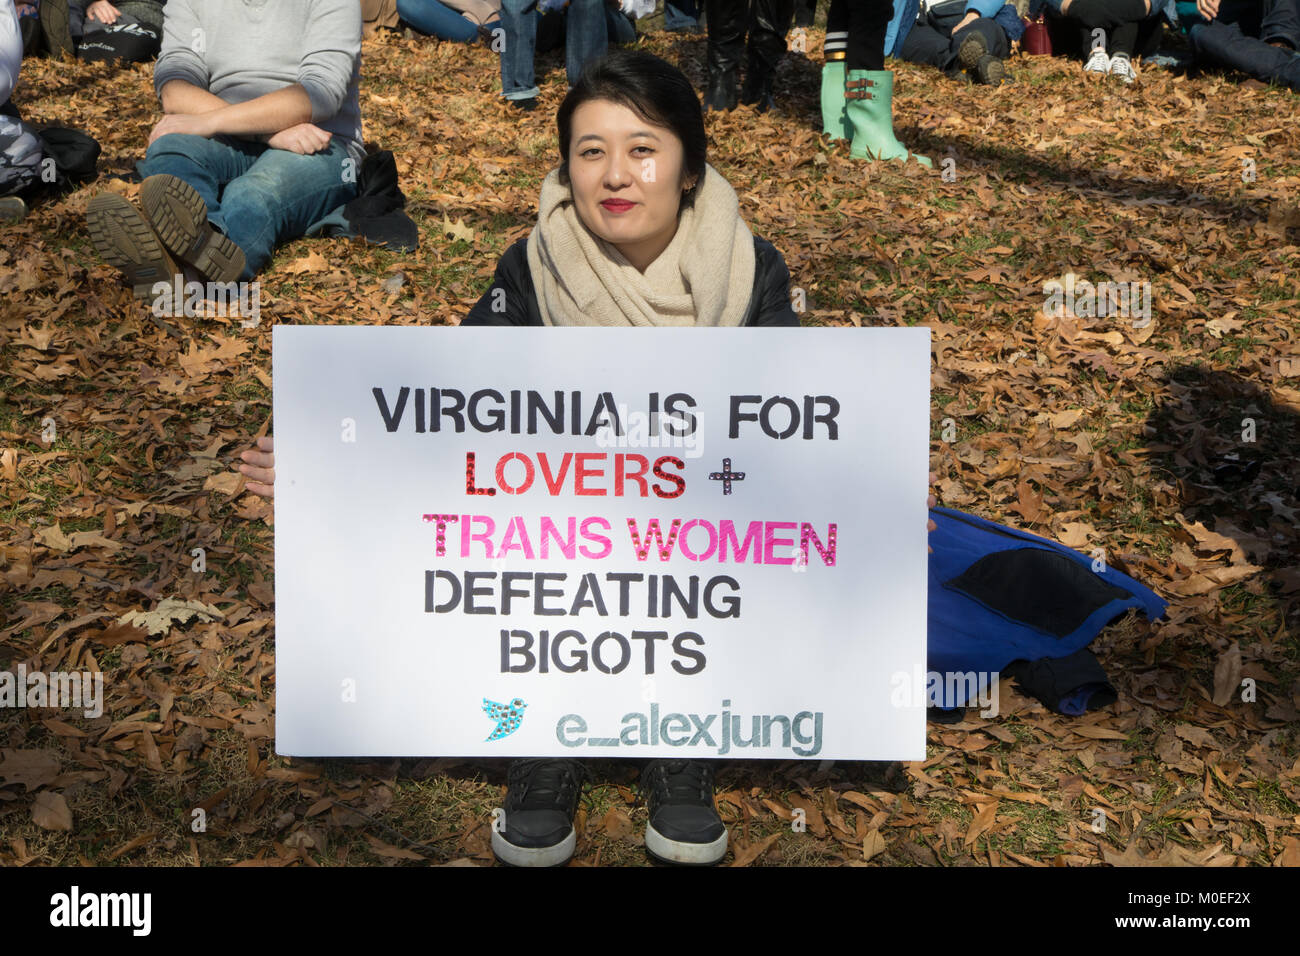 Washington, United States Of America. 20th Jan, 2018. 'Virginia is for lovers and trans women defeating bigots' reads the sign. Thousands of activists gathered on the National Mall and marched to the White House for the 2018 Women's March on Washington, DC on January 20, demanding respect for women and protesting against President Donald Trump and his policies - one of several such protests around the country marking the anniversary of President Trump's first year in office. (Photo by Jeff Malet) Photo via Credit: Newscom/Alamy Live News Stock Photo